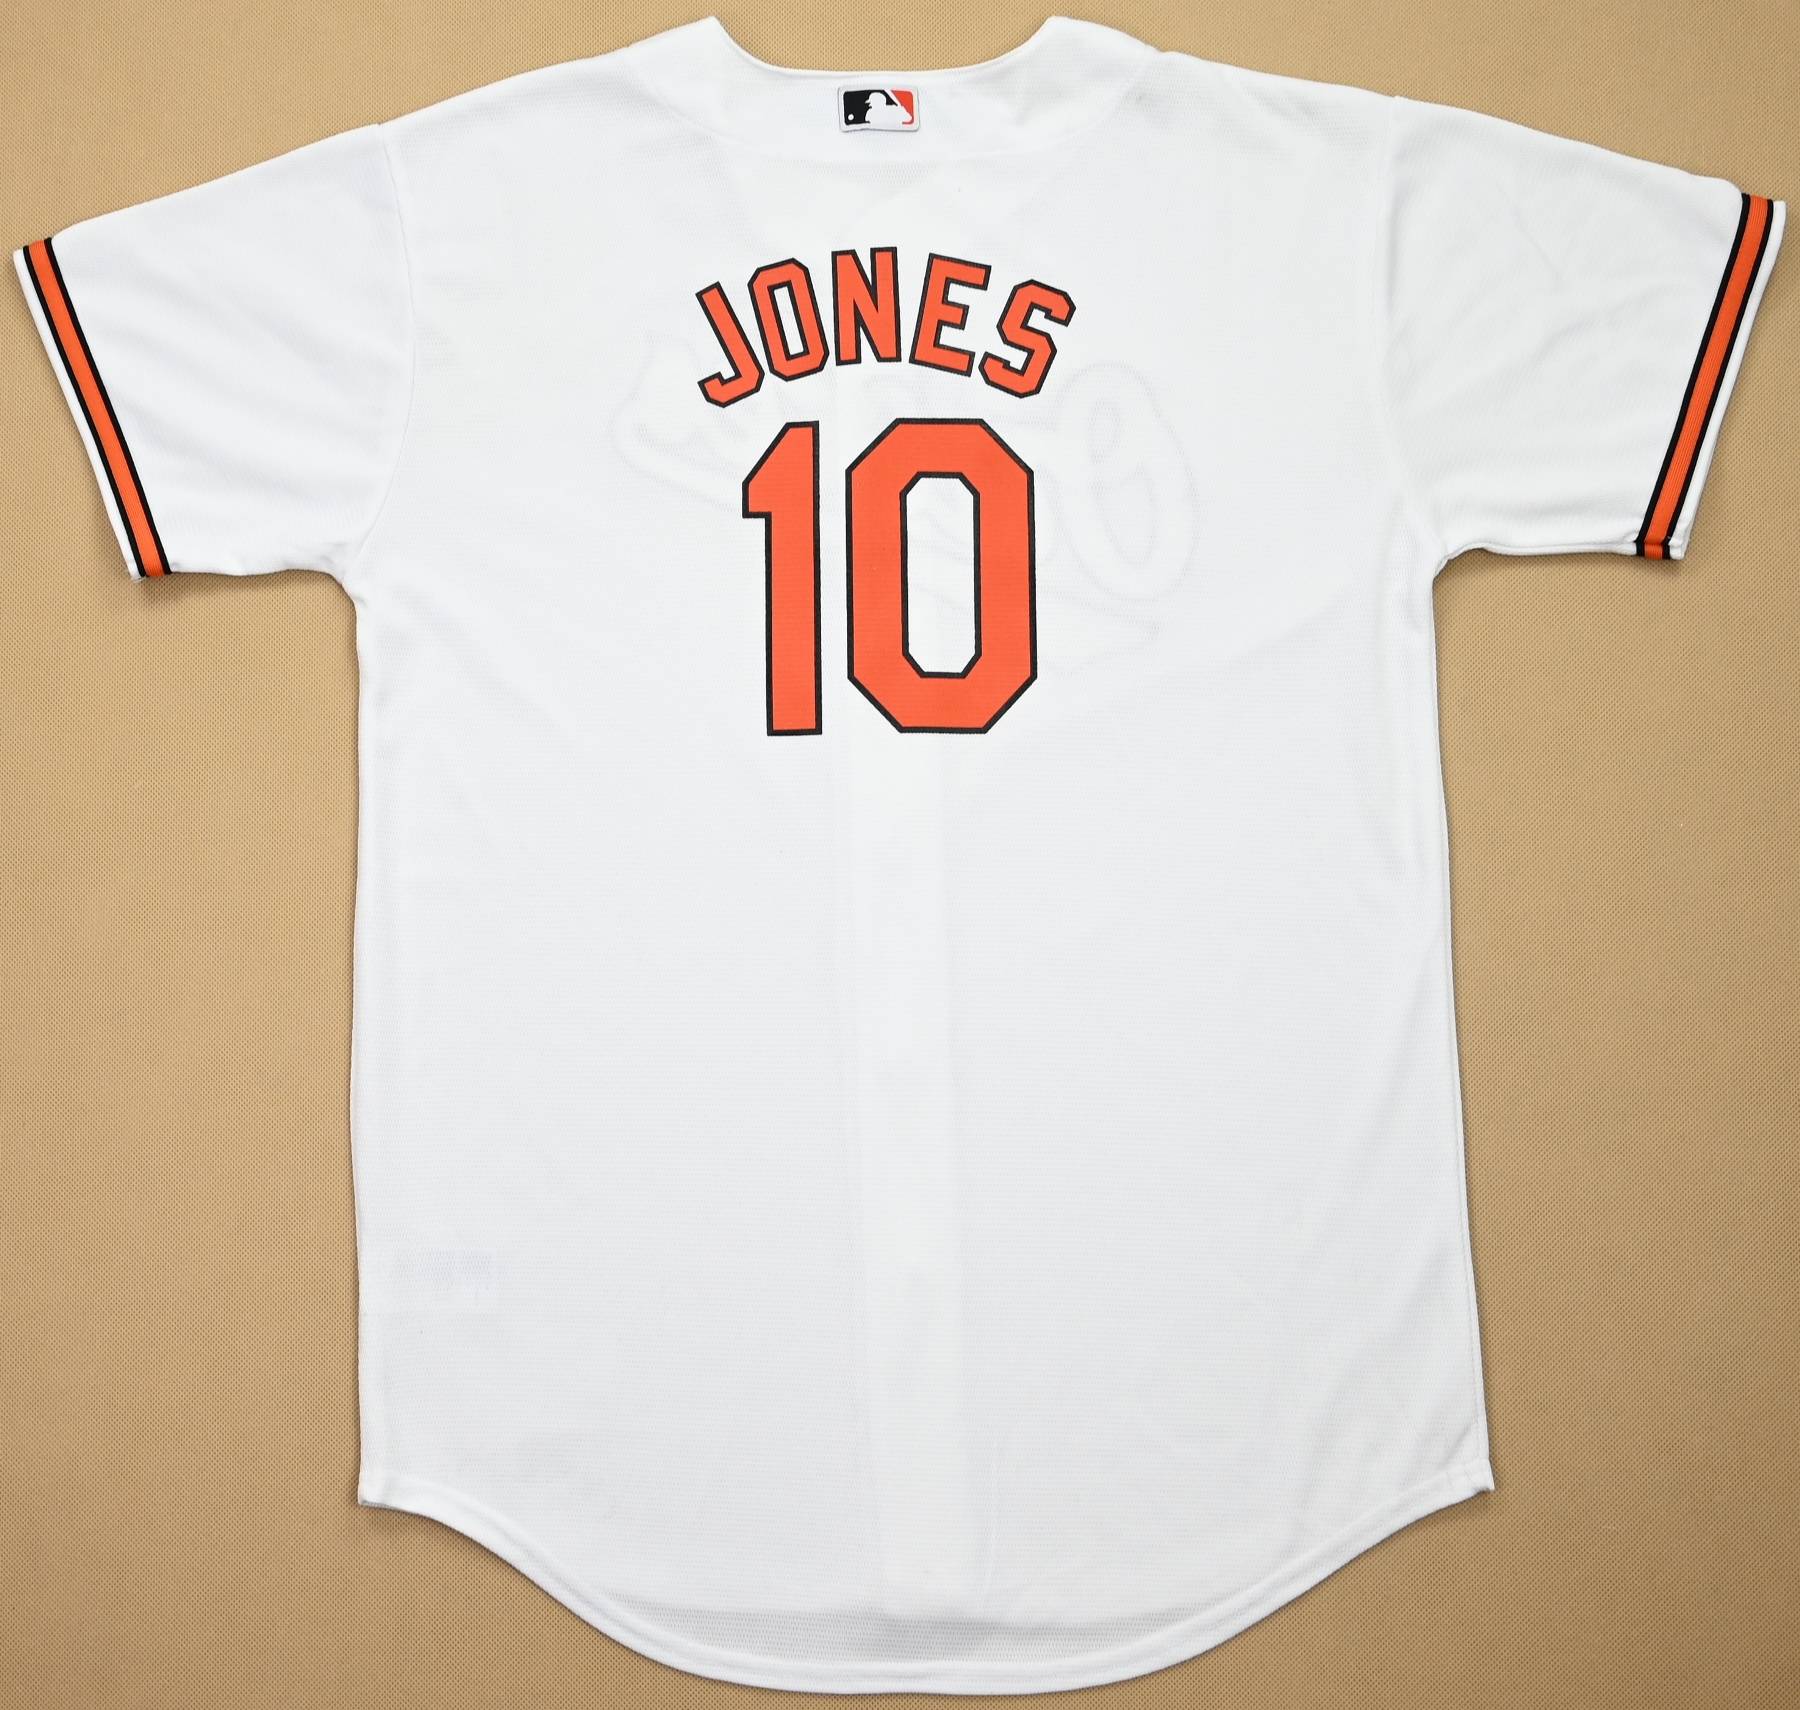 Baltimore Orioles 6 Size MLB Jerseys for sale